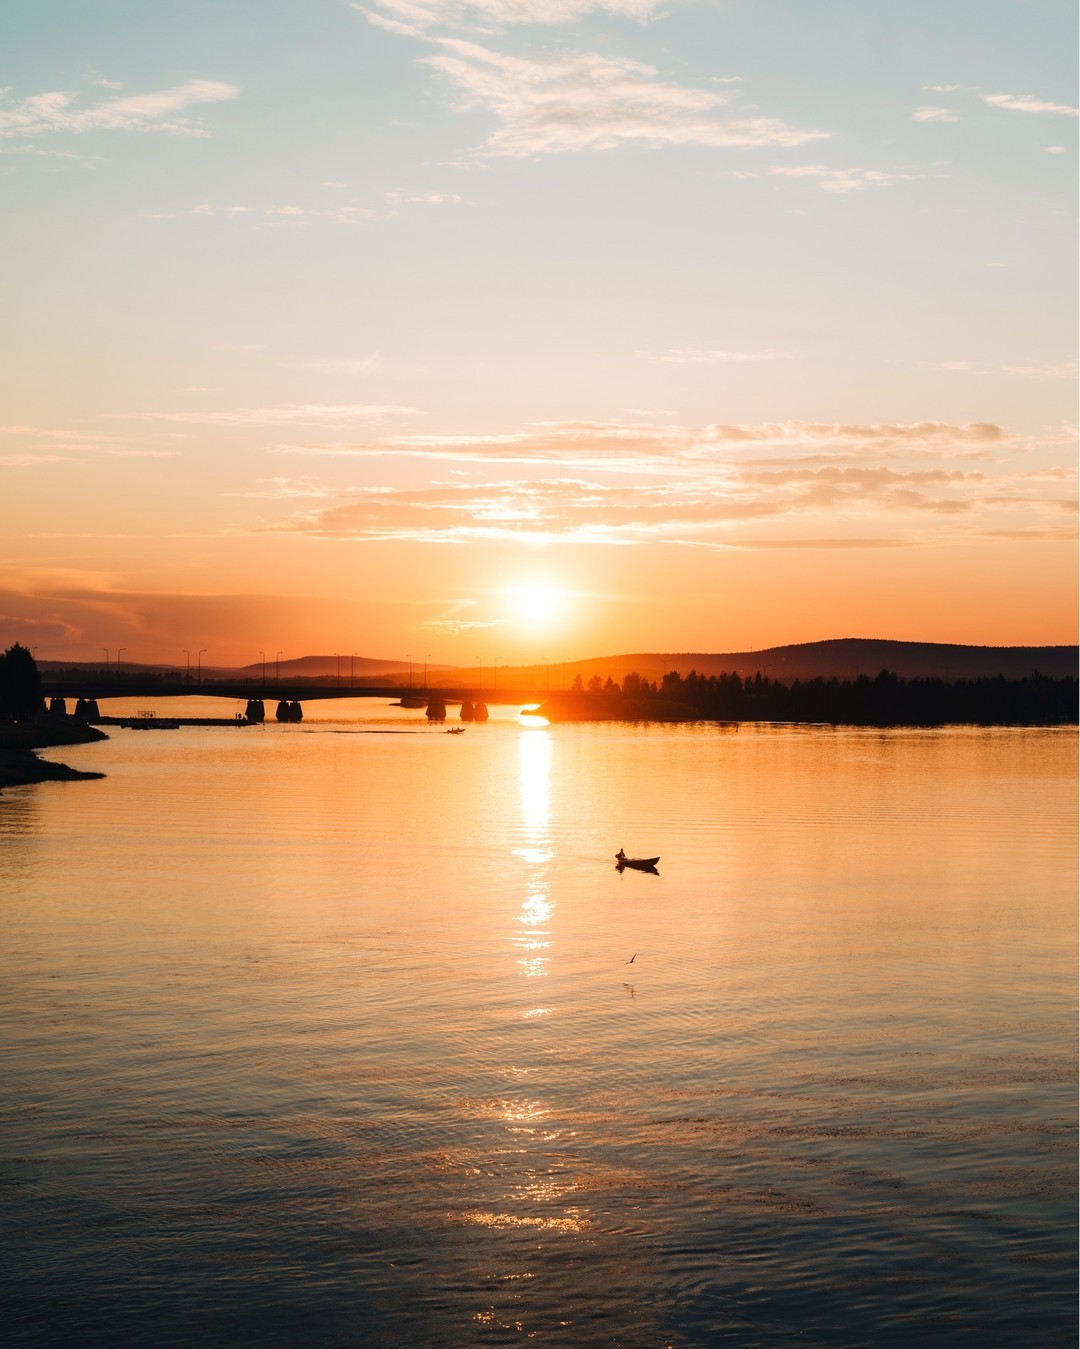 Long days under the sun!😍
Today the sunset in Rovaniemi is at 23.40, and the length of the day is over 20 hours!🌞 
The nights are white until early August.

#rovaniemi #visitrovaniemi #midnightsun #lapland #finland #ourfinland #onlyinlapland